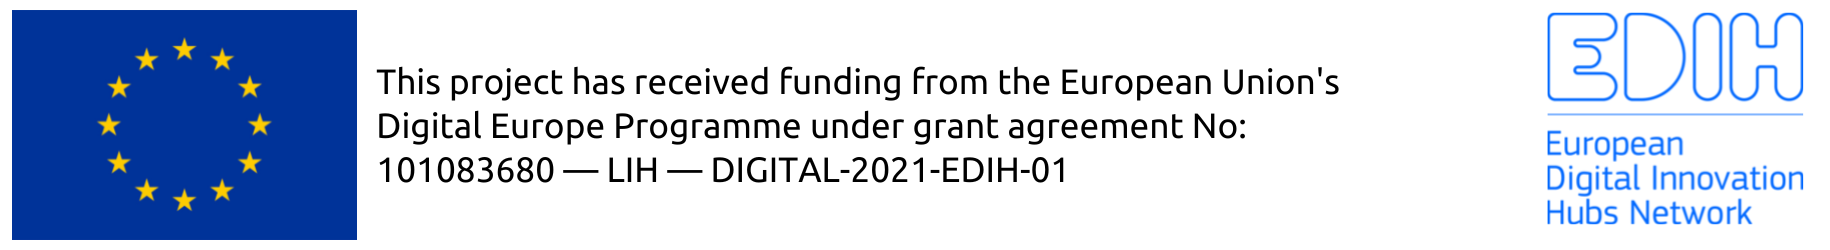 This project has received funding from the European Union's Digital Europe Programme under grant agreement No: 101083680 — LIH — DIGITAL-2021-EDIH-01